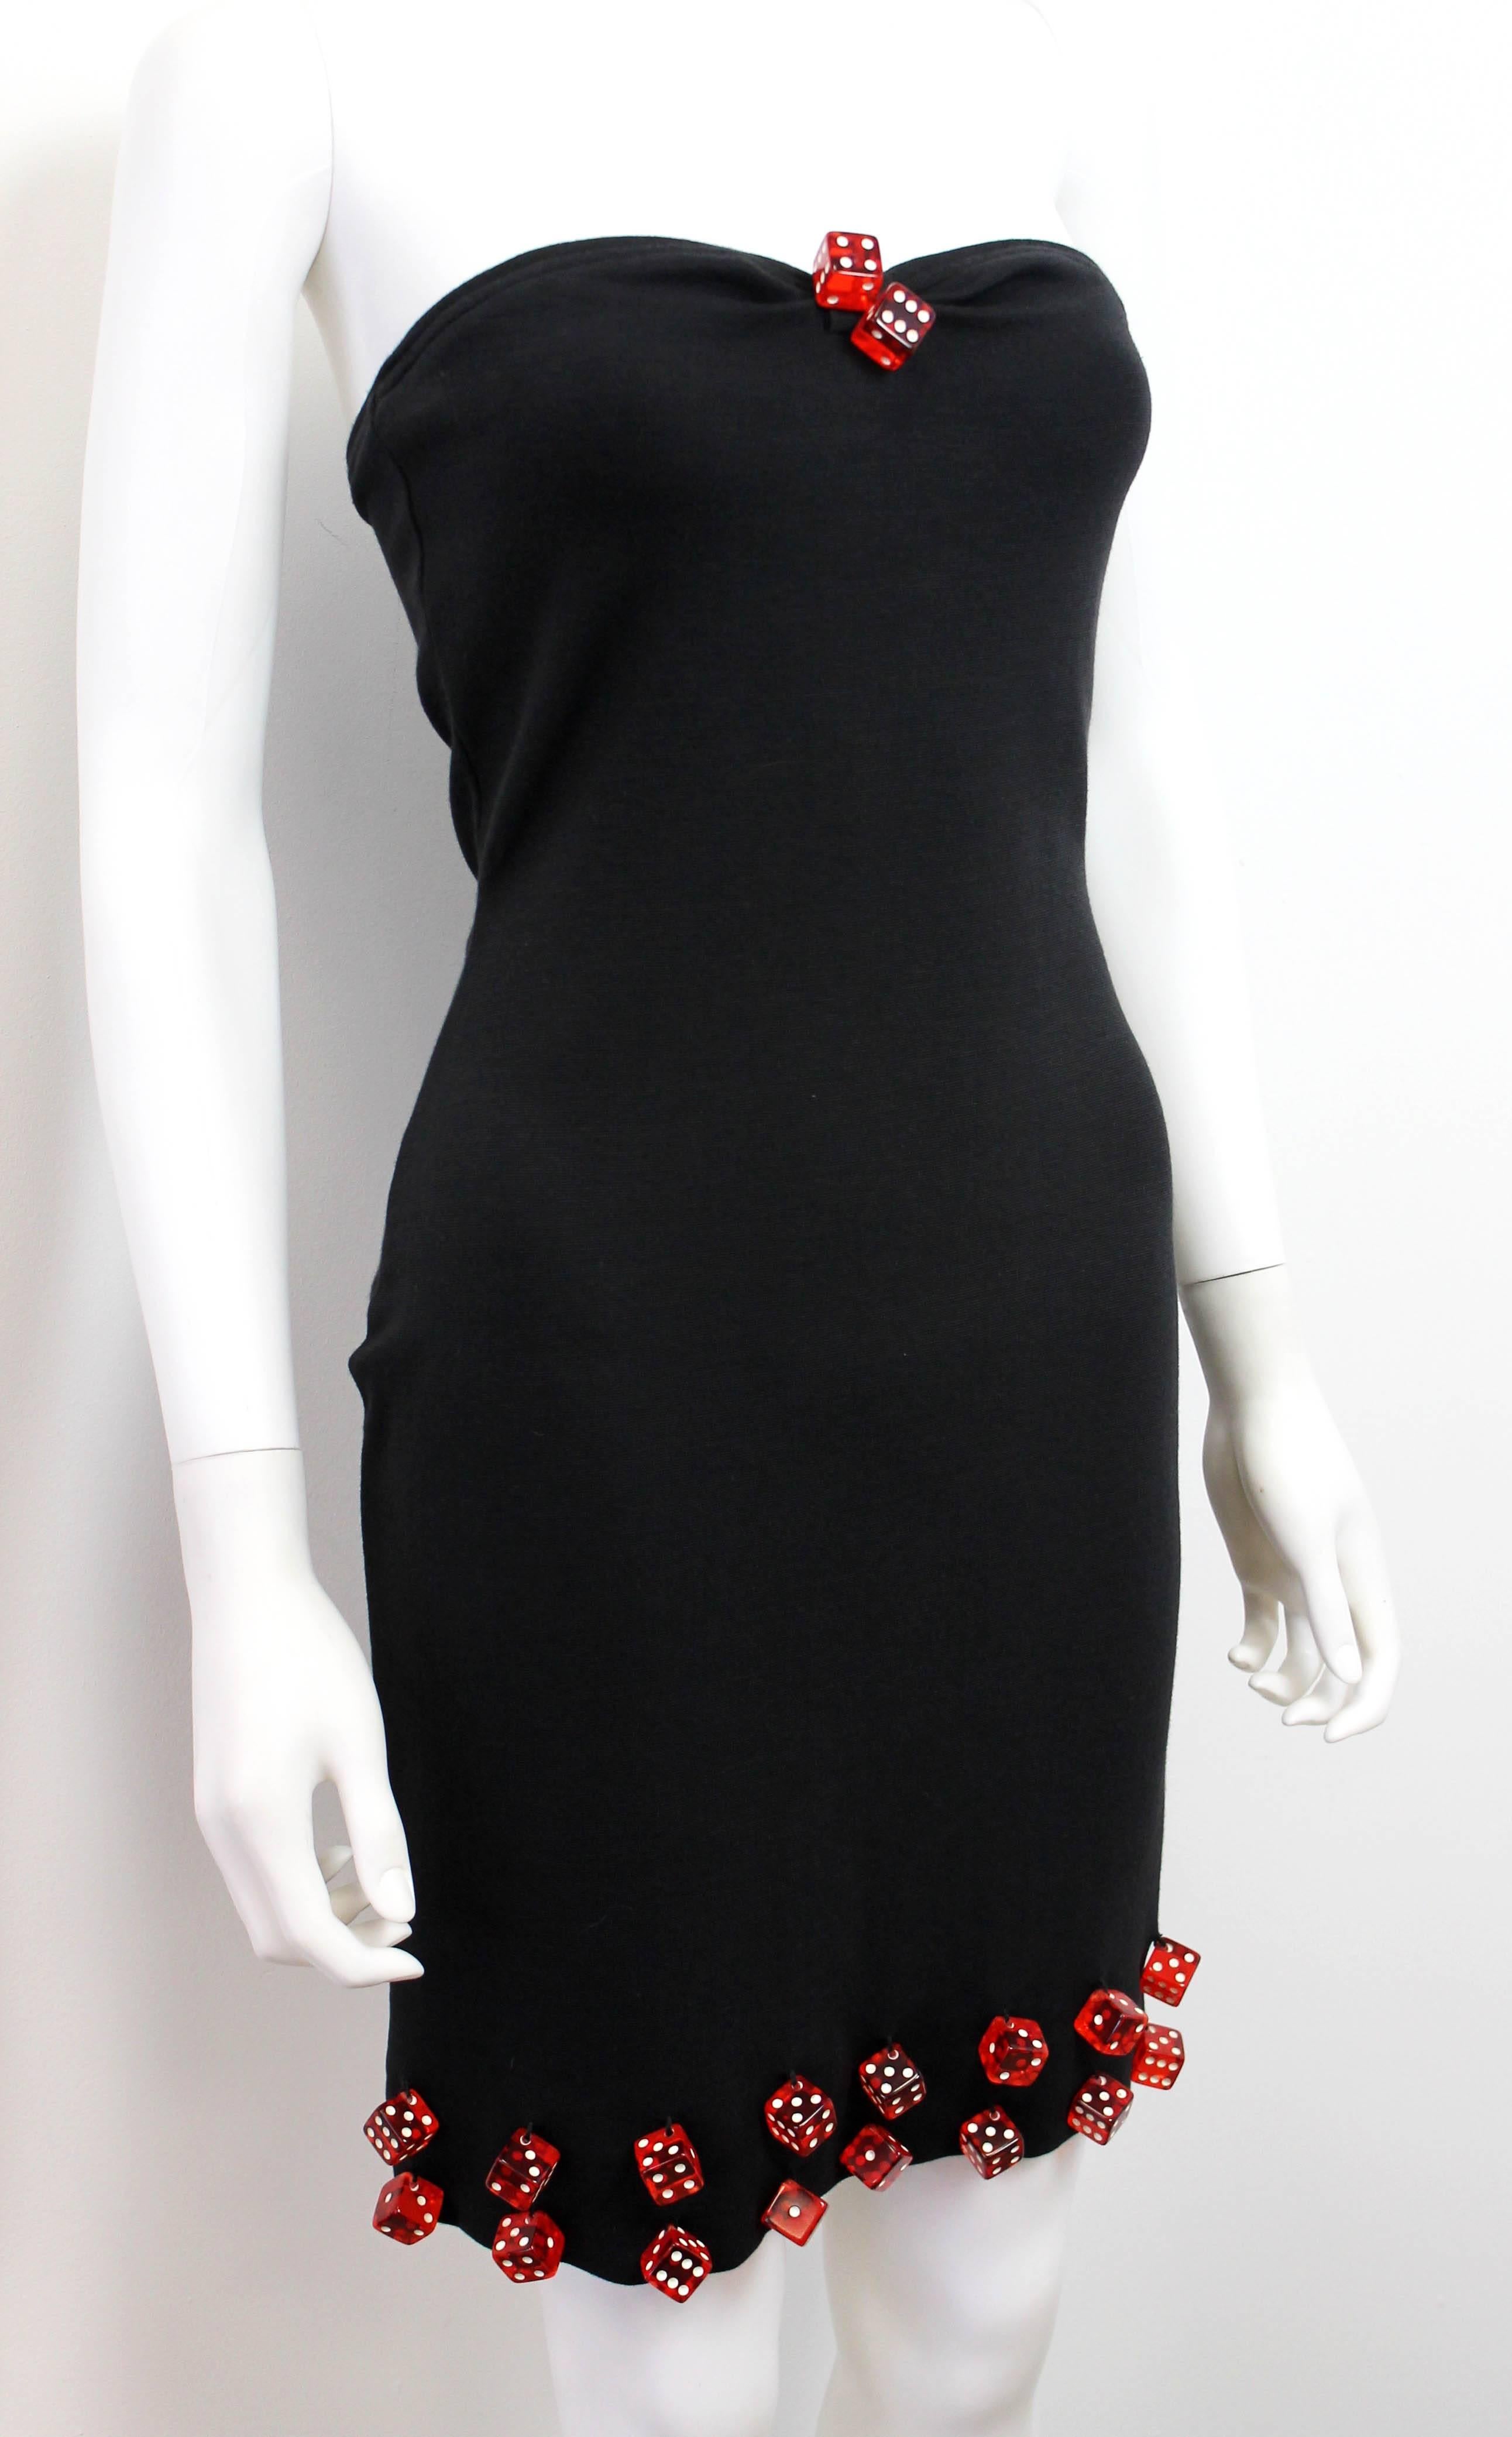 Patrick Kelly Dice Dress c. 1988 In Excellent Condition For Sale In London, GB